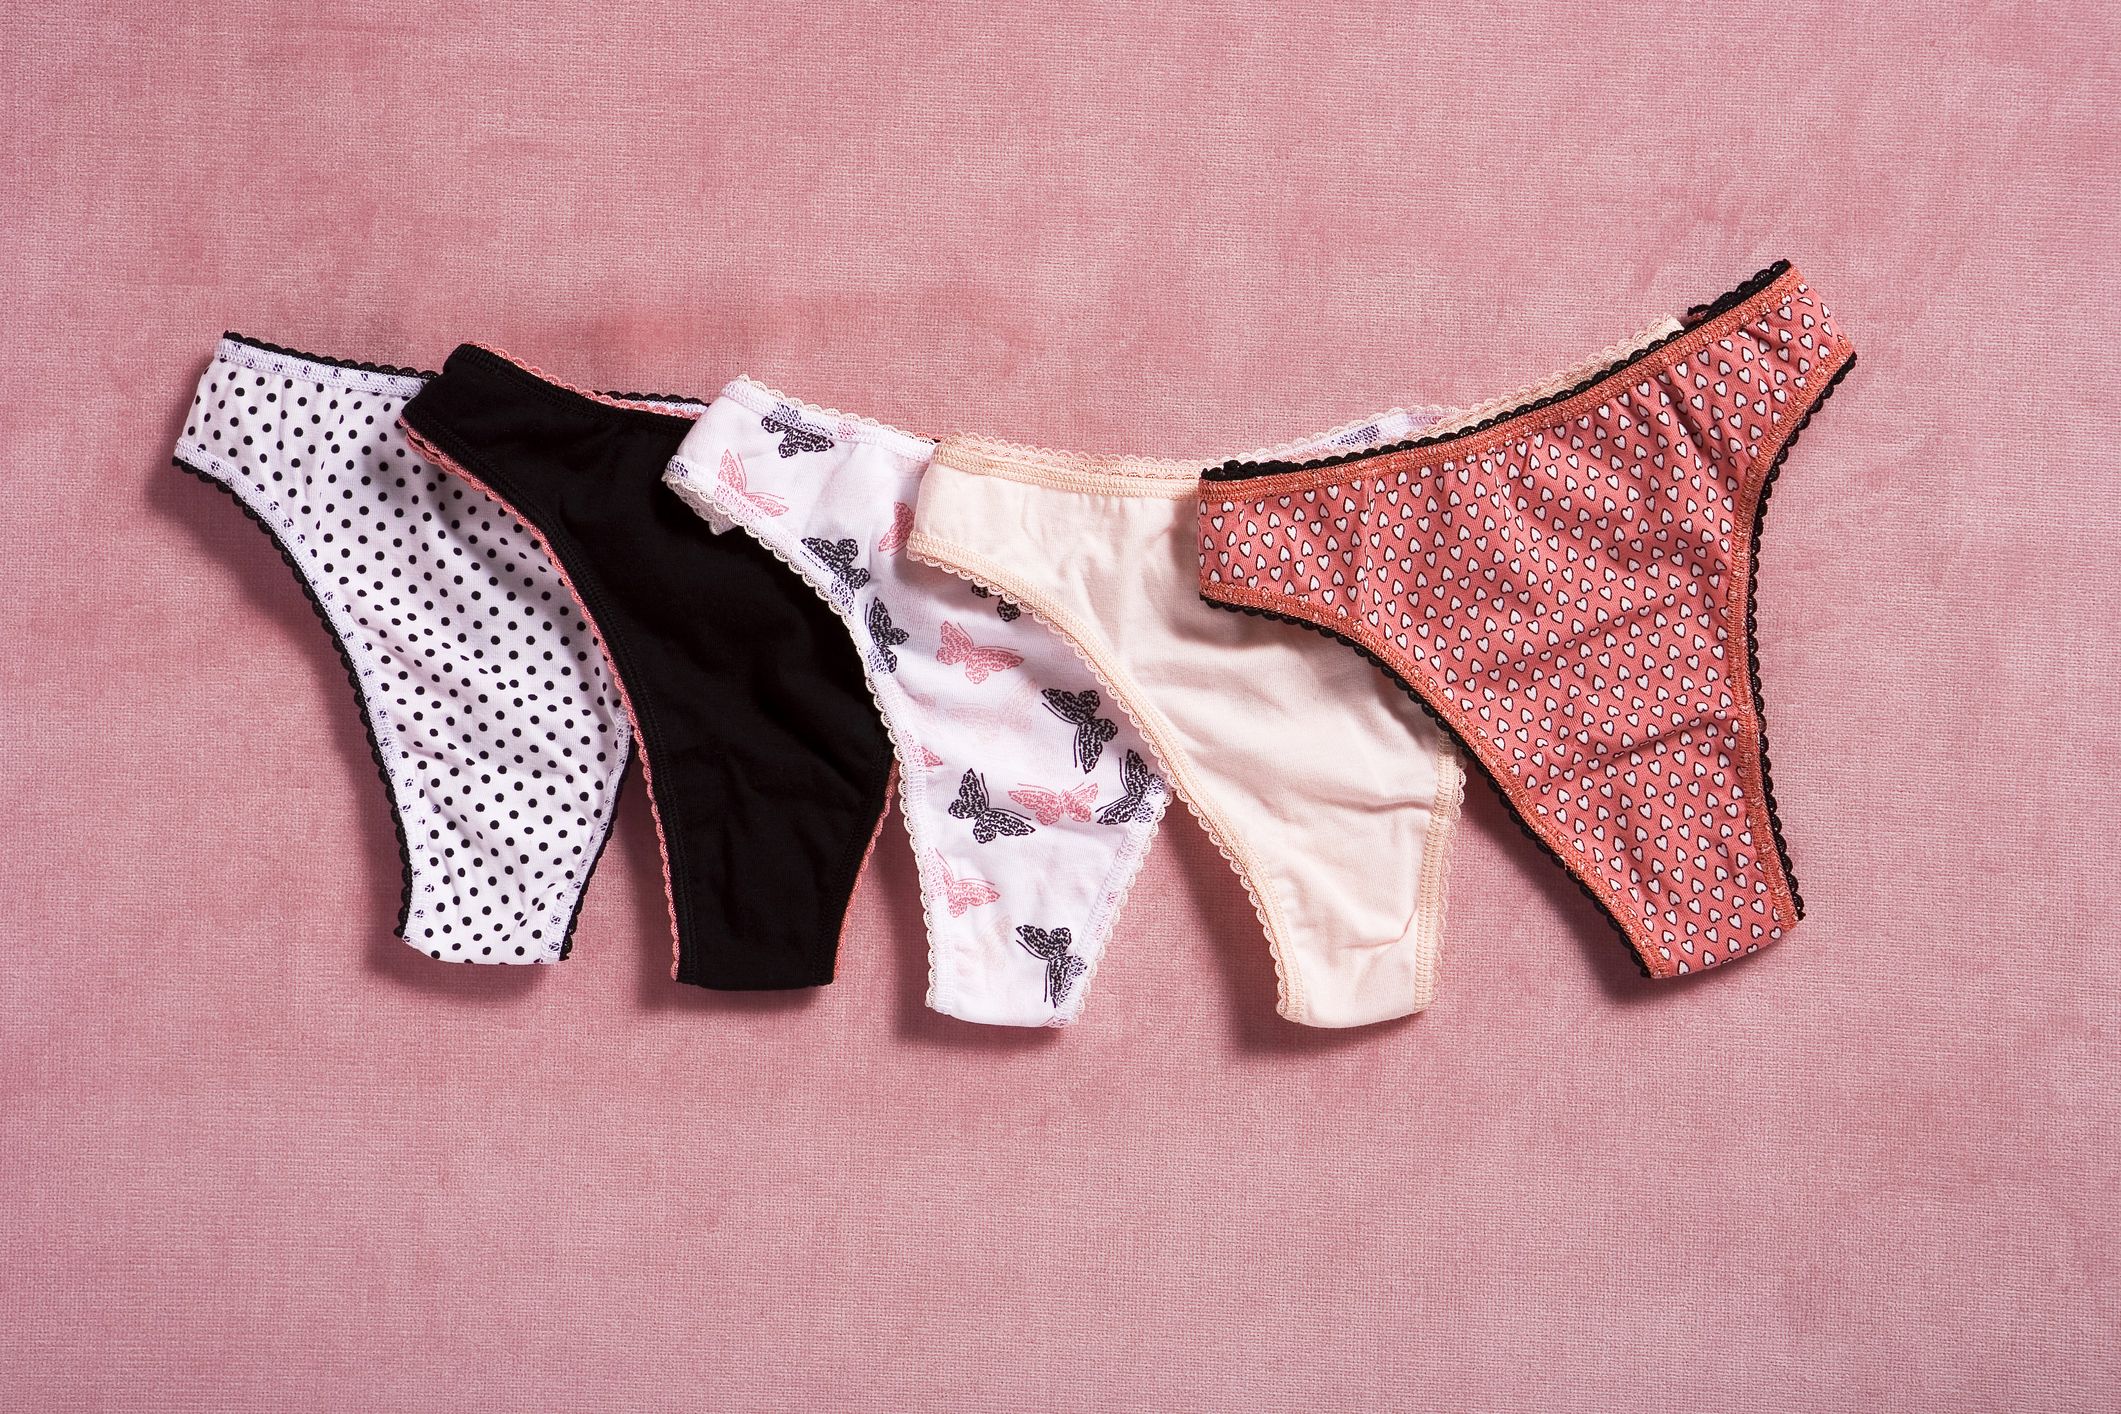 Gynaecologist explains when you shouldn't risk wearing a thong